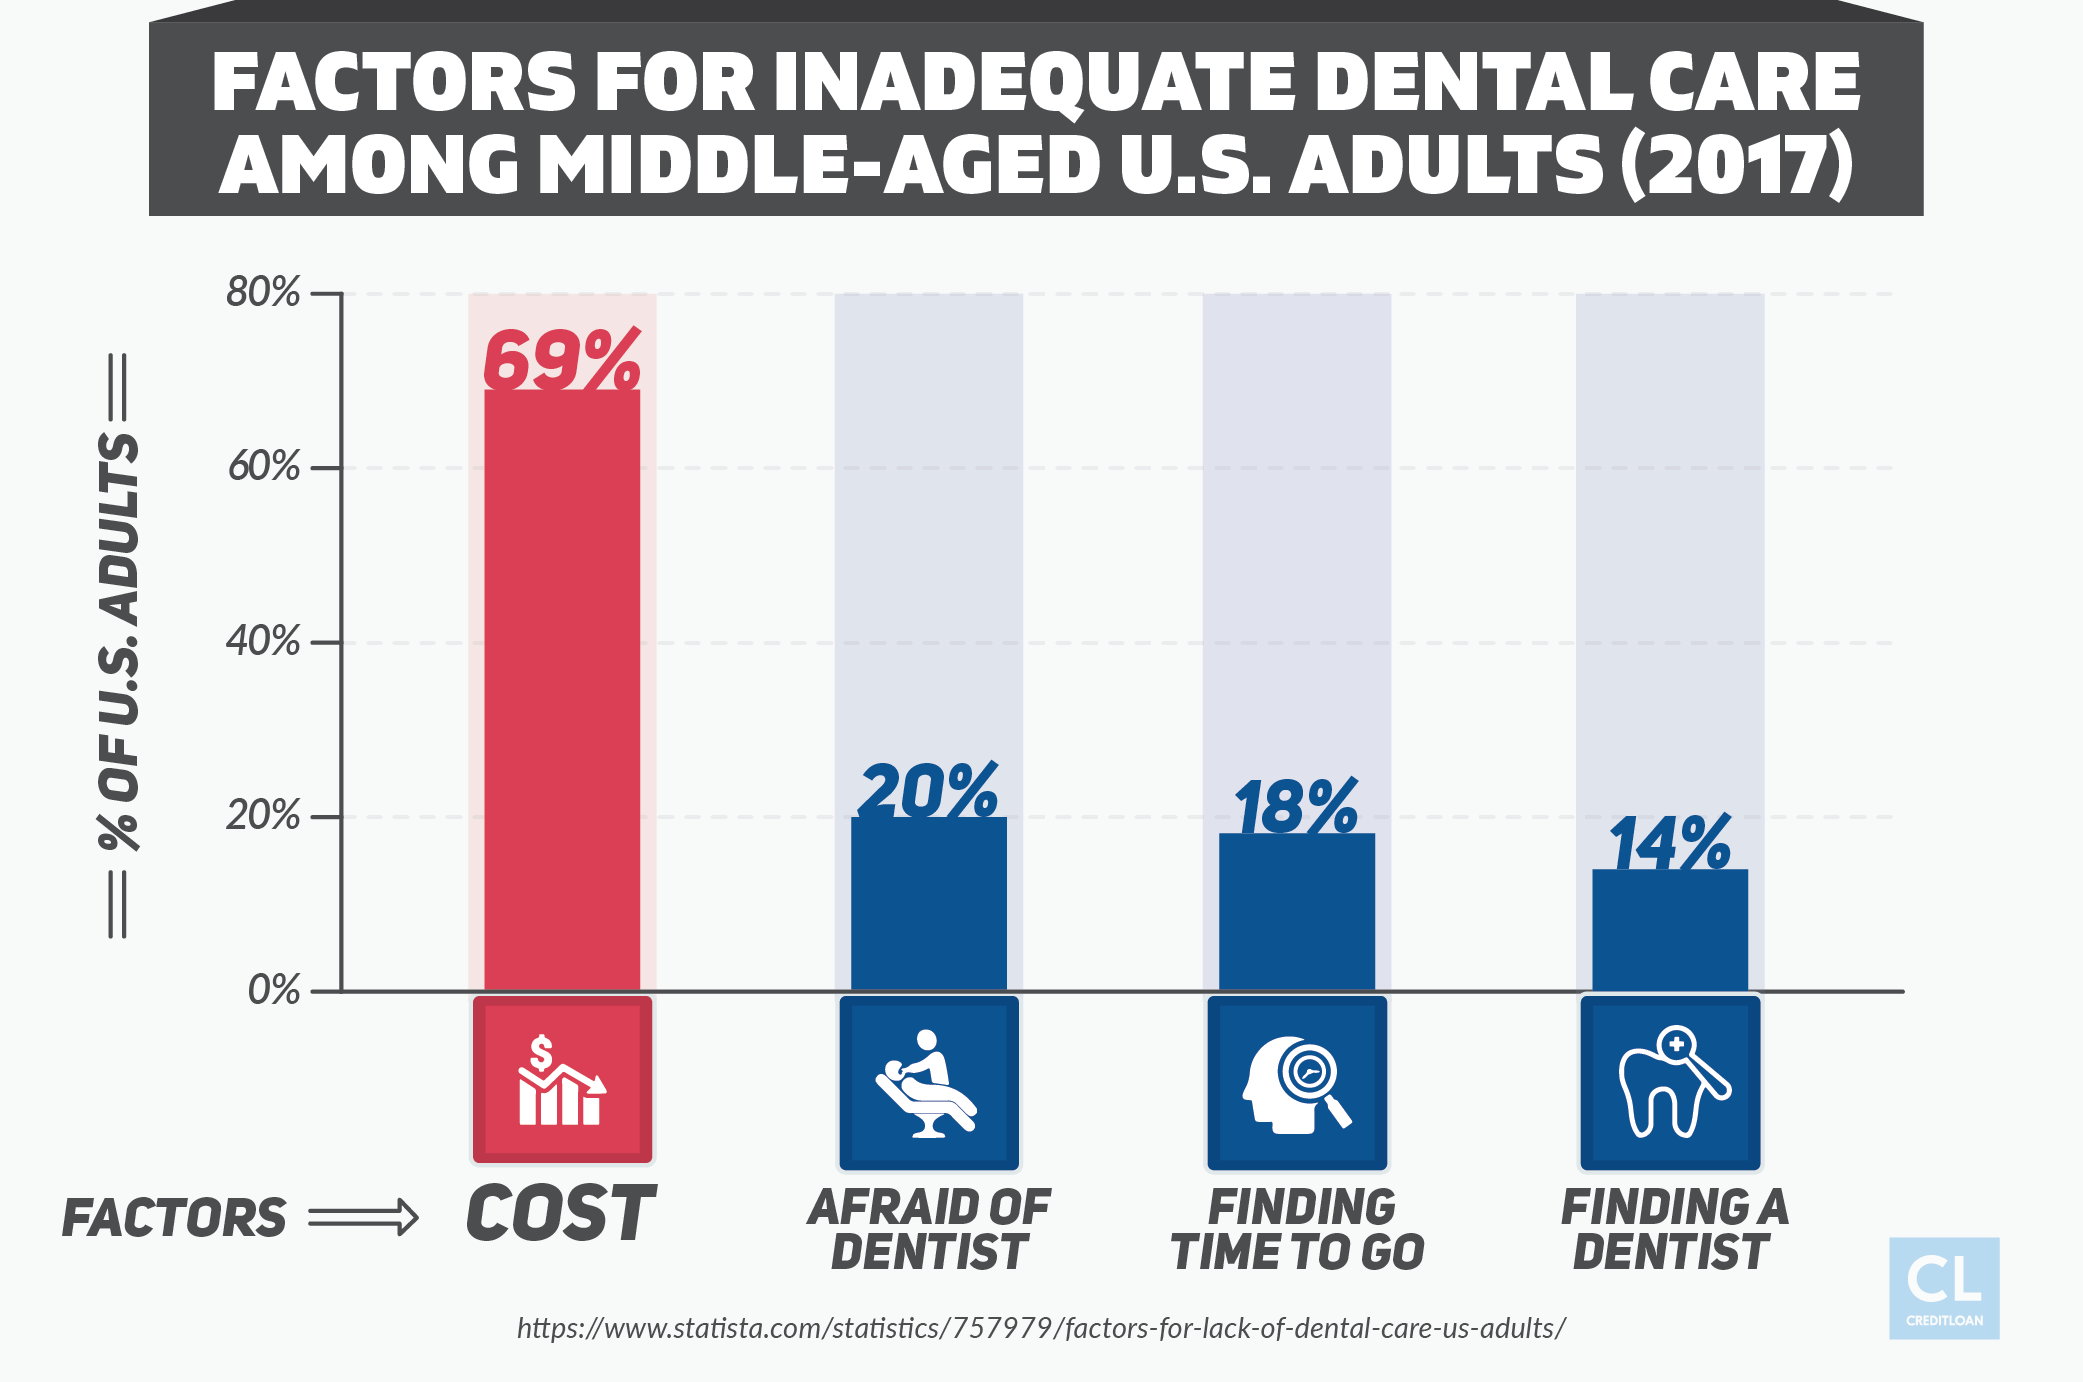 Factors For Inadequate Dental Care Among Middle-Aged U.S. Adults